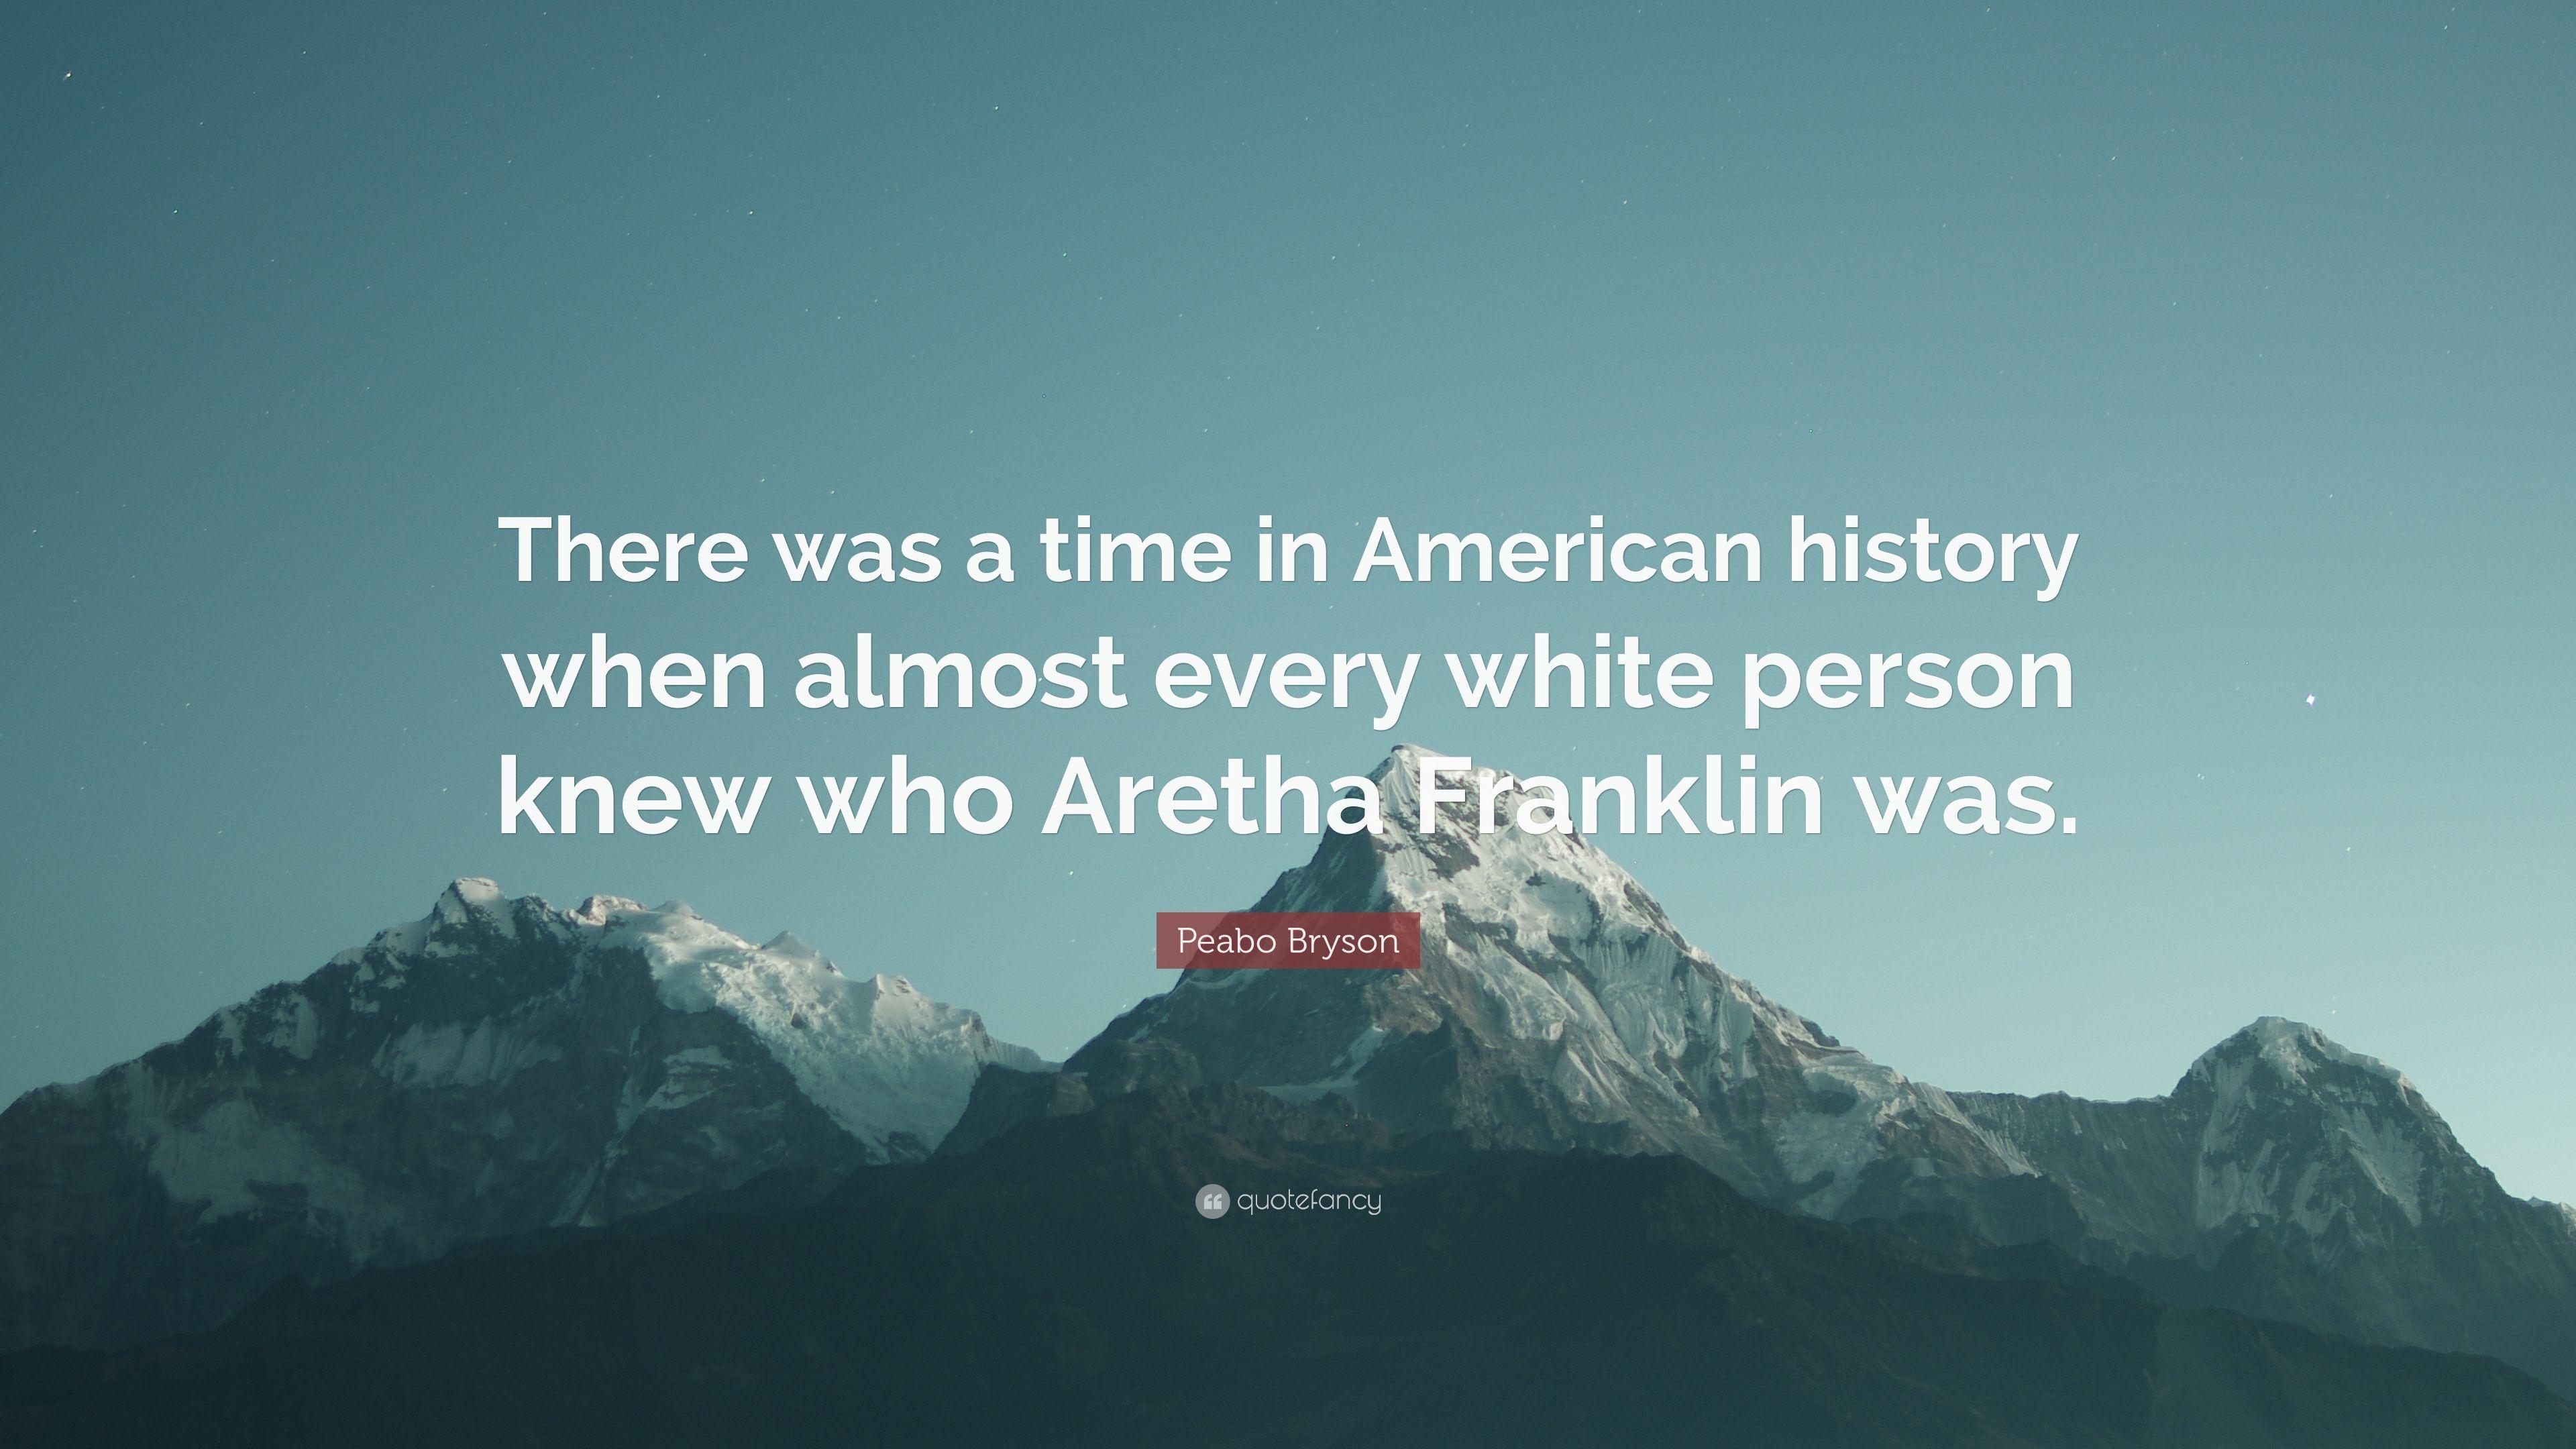 Peabo Bryson Quote: “There was a time in American history when